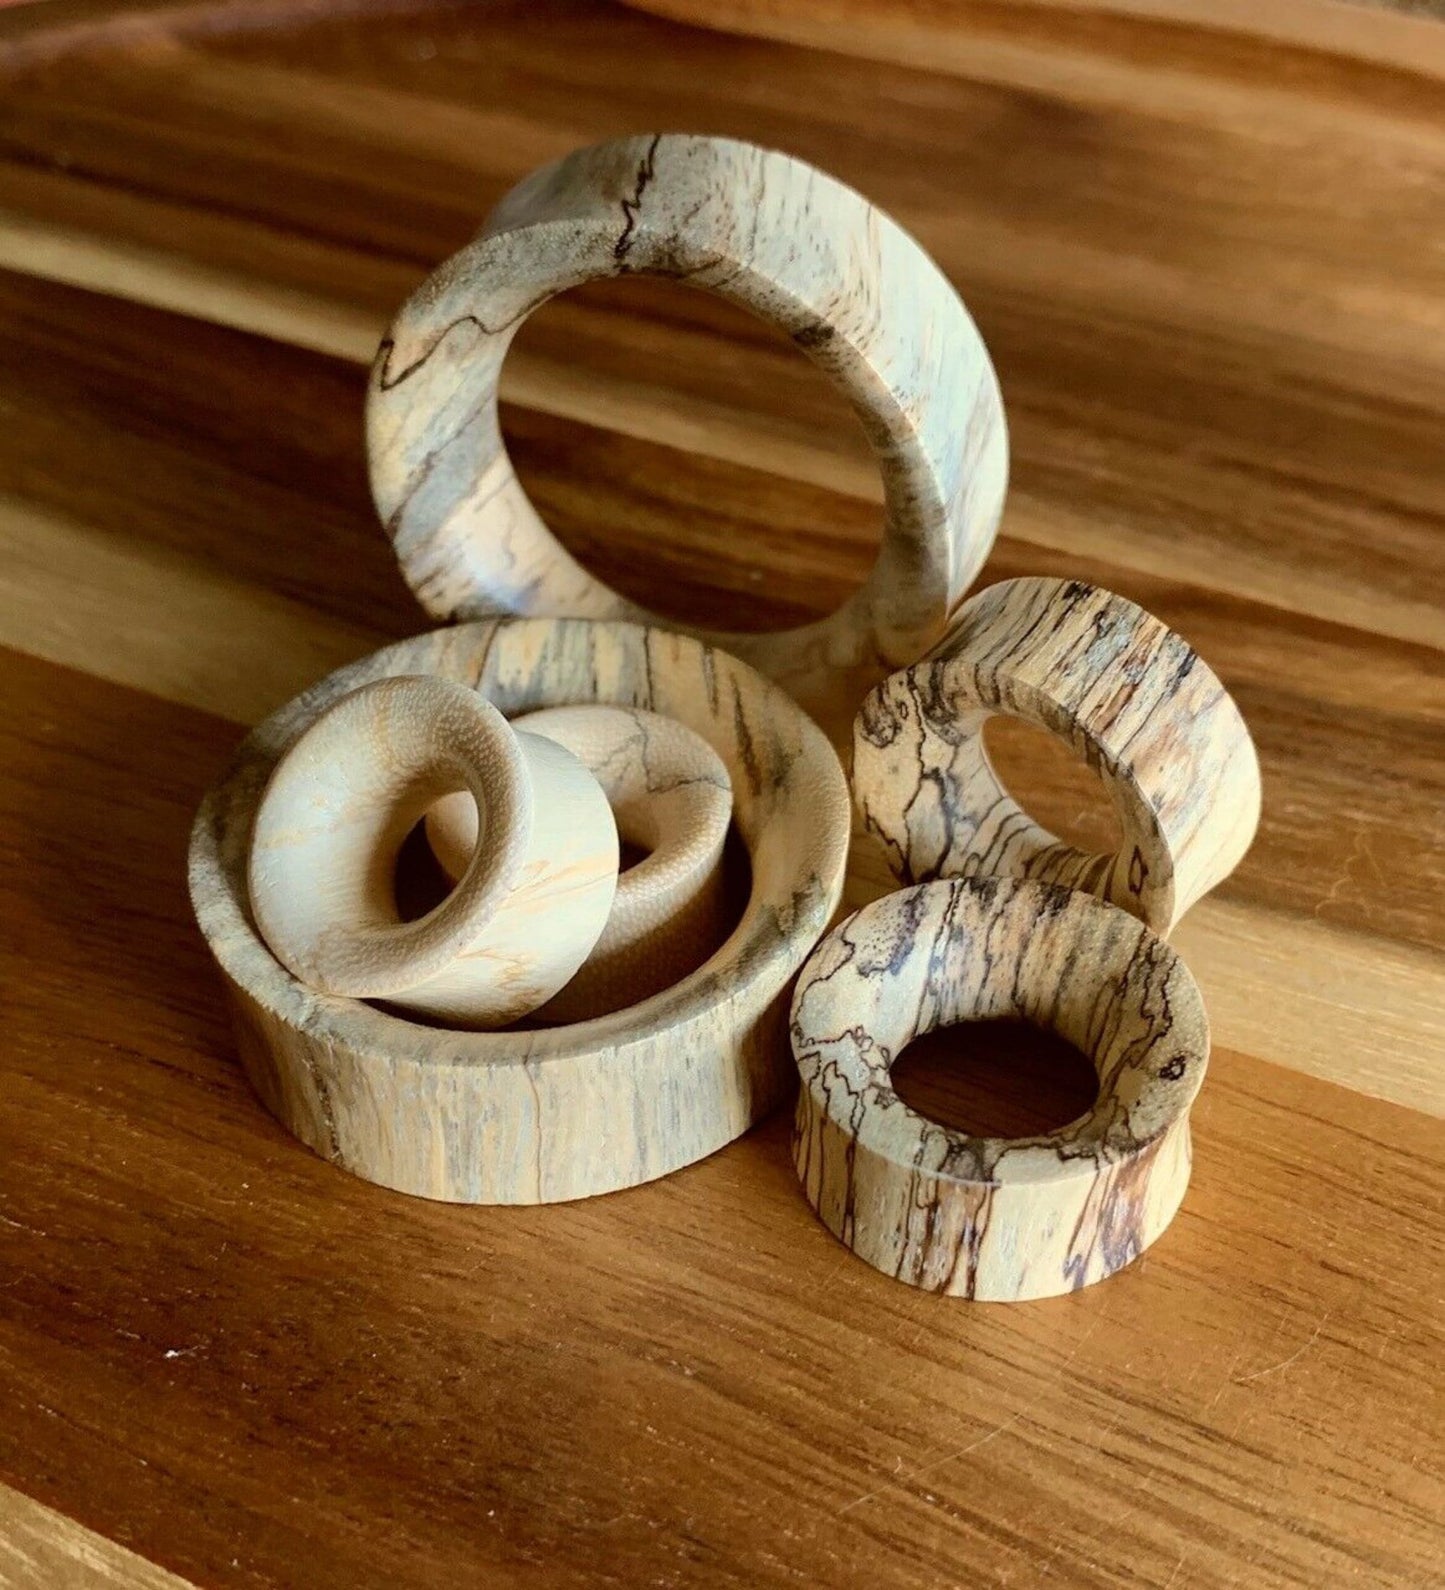 PAIR of Stunning Organic Tamarind Wood Tunnel/Plugs - Gauges 0g (8mm) up to 2" (50mm) available!